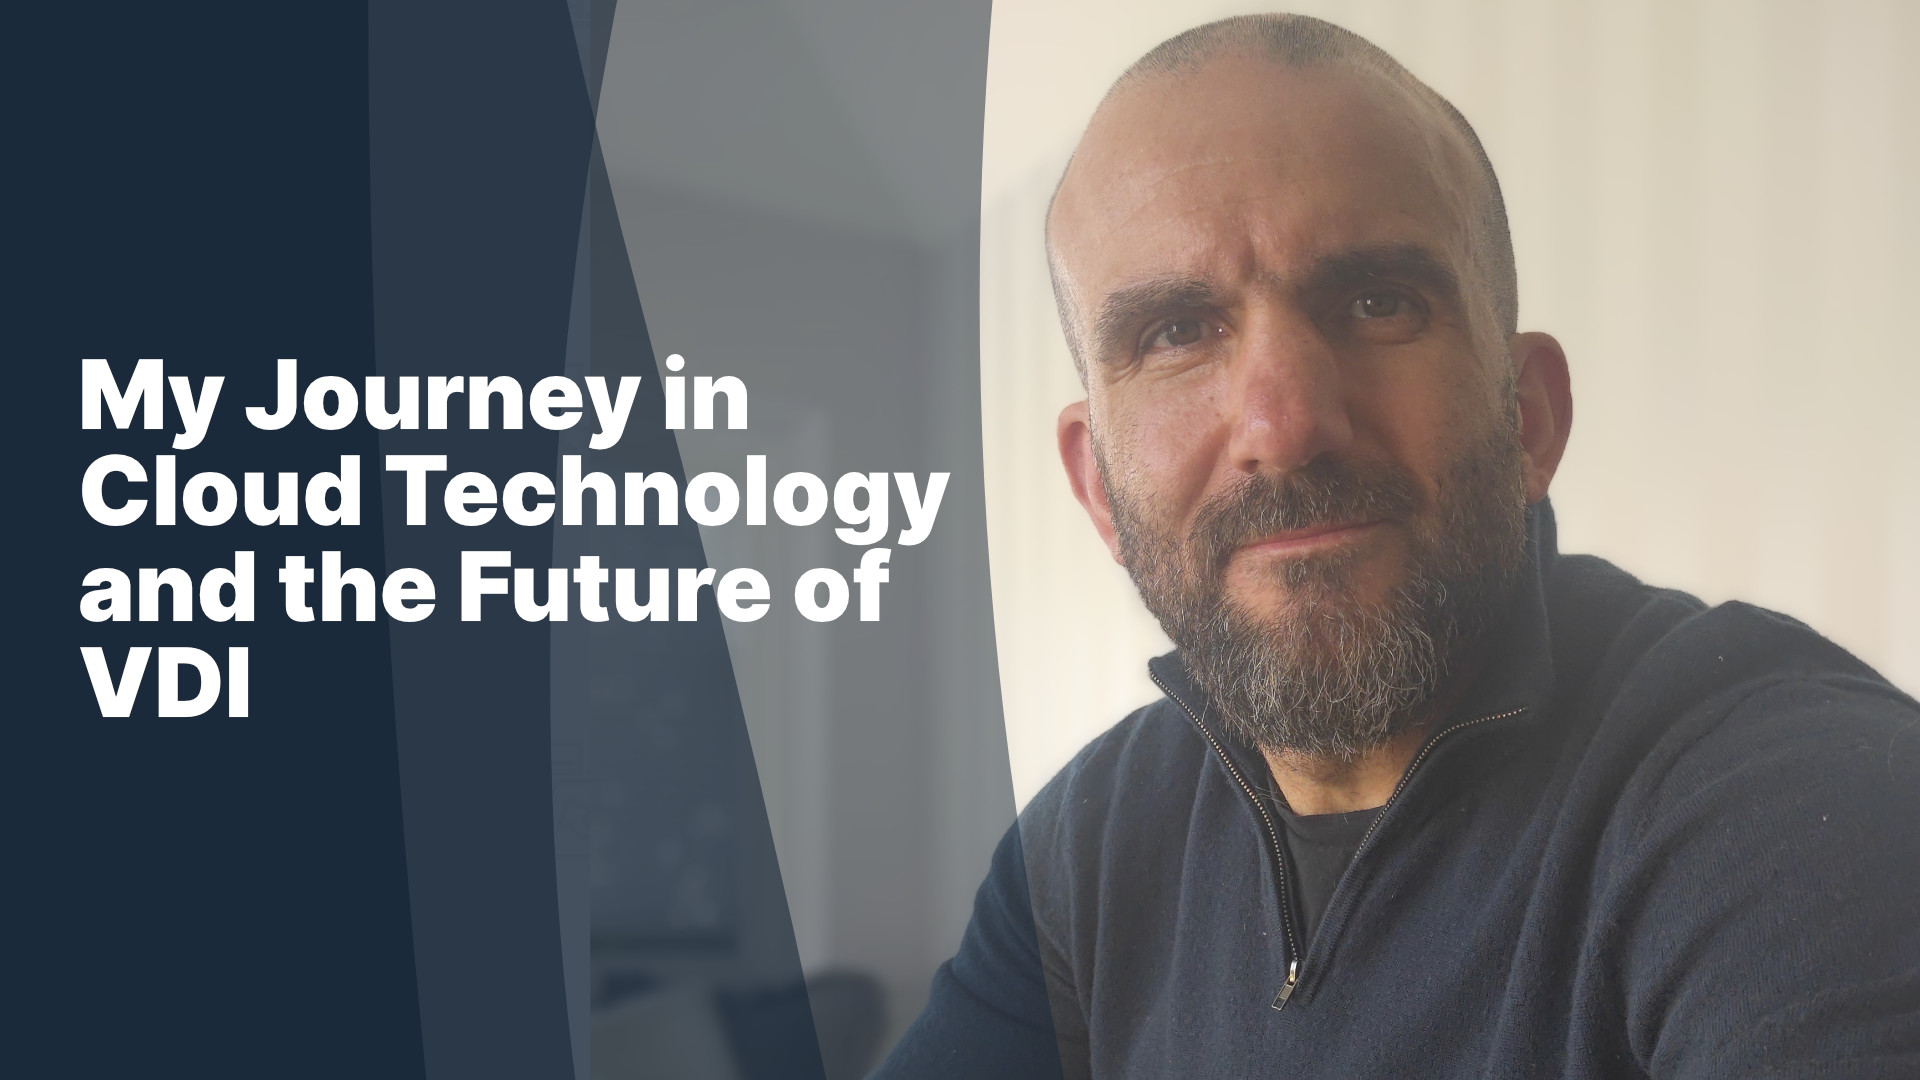 My Journey in Cloud Technology and the Future of VDI